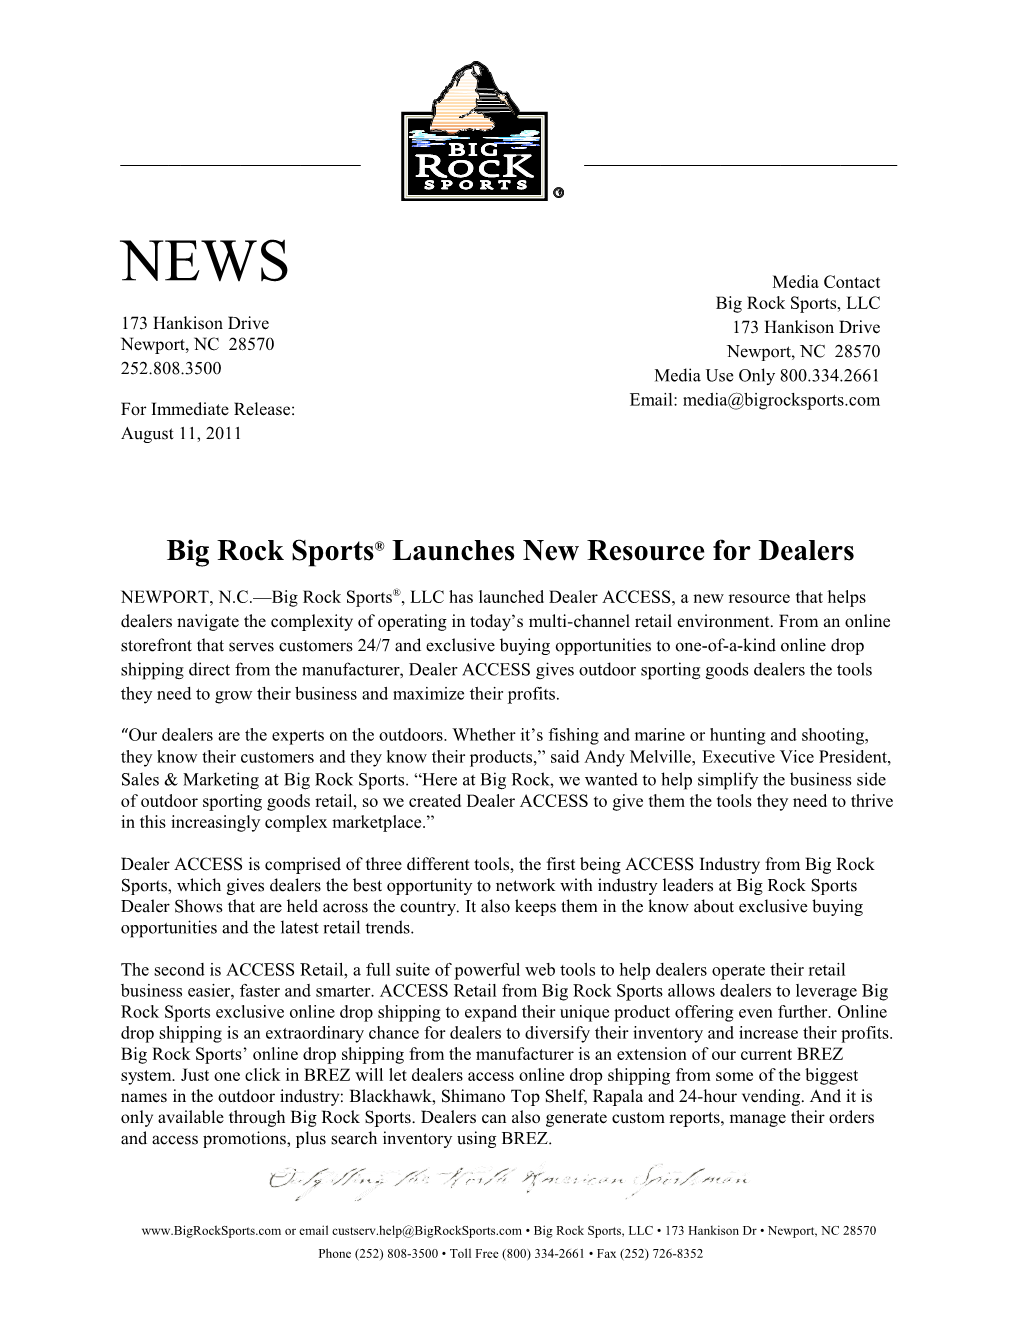 Big Rock Sports Launches New Resource for Dealers